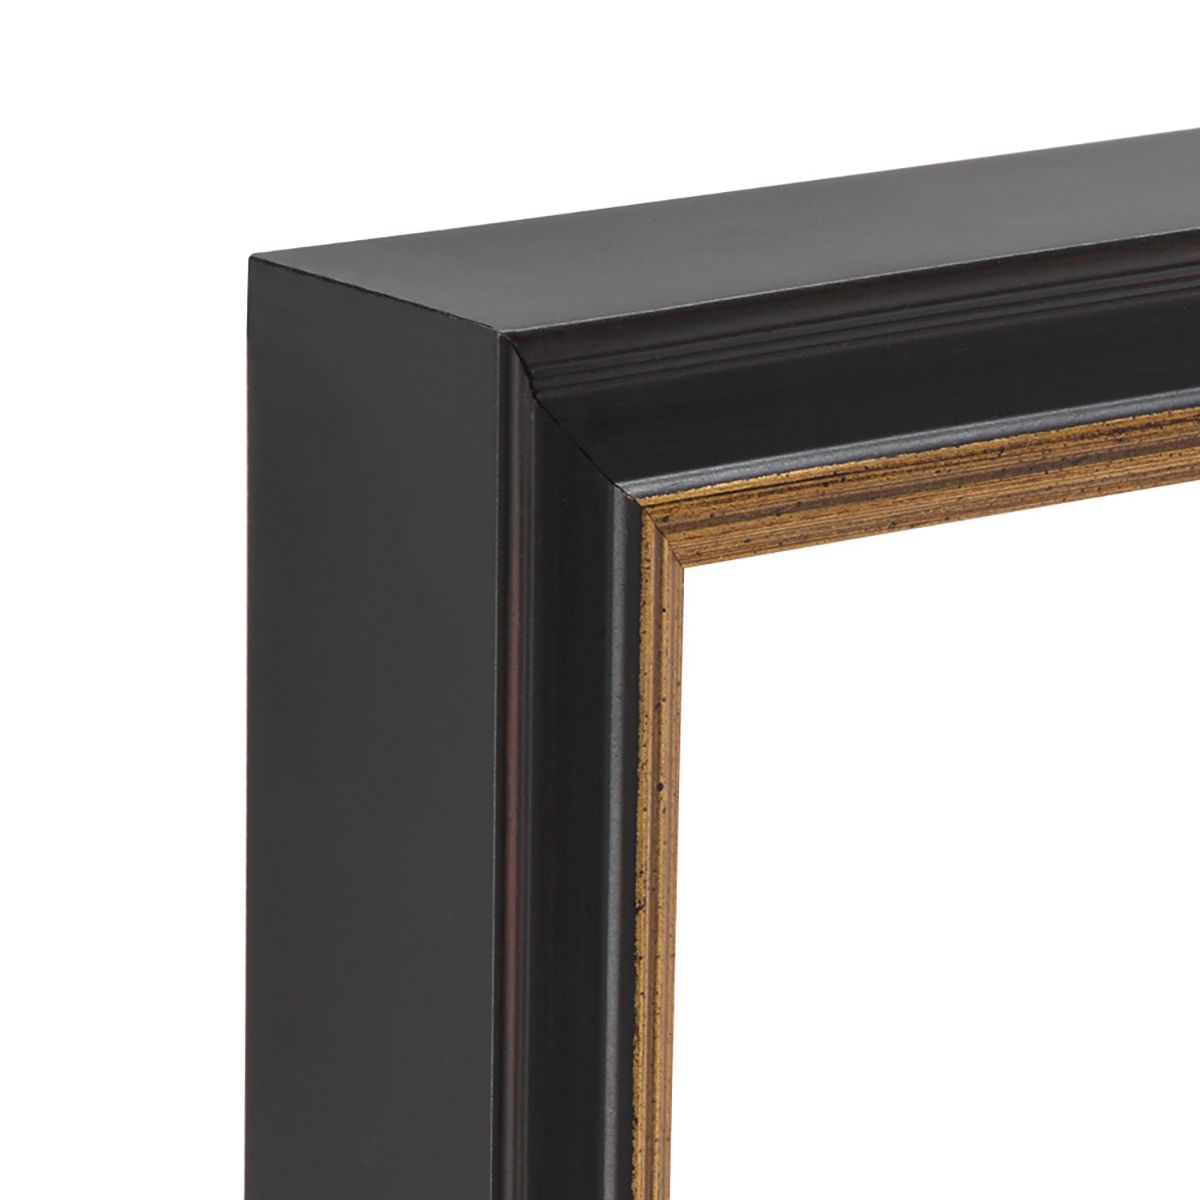 Millbrook Collection: Academy Black 3/4" Frame 12"x16" With Glass